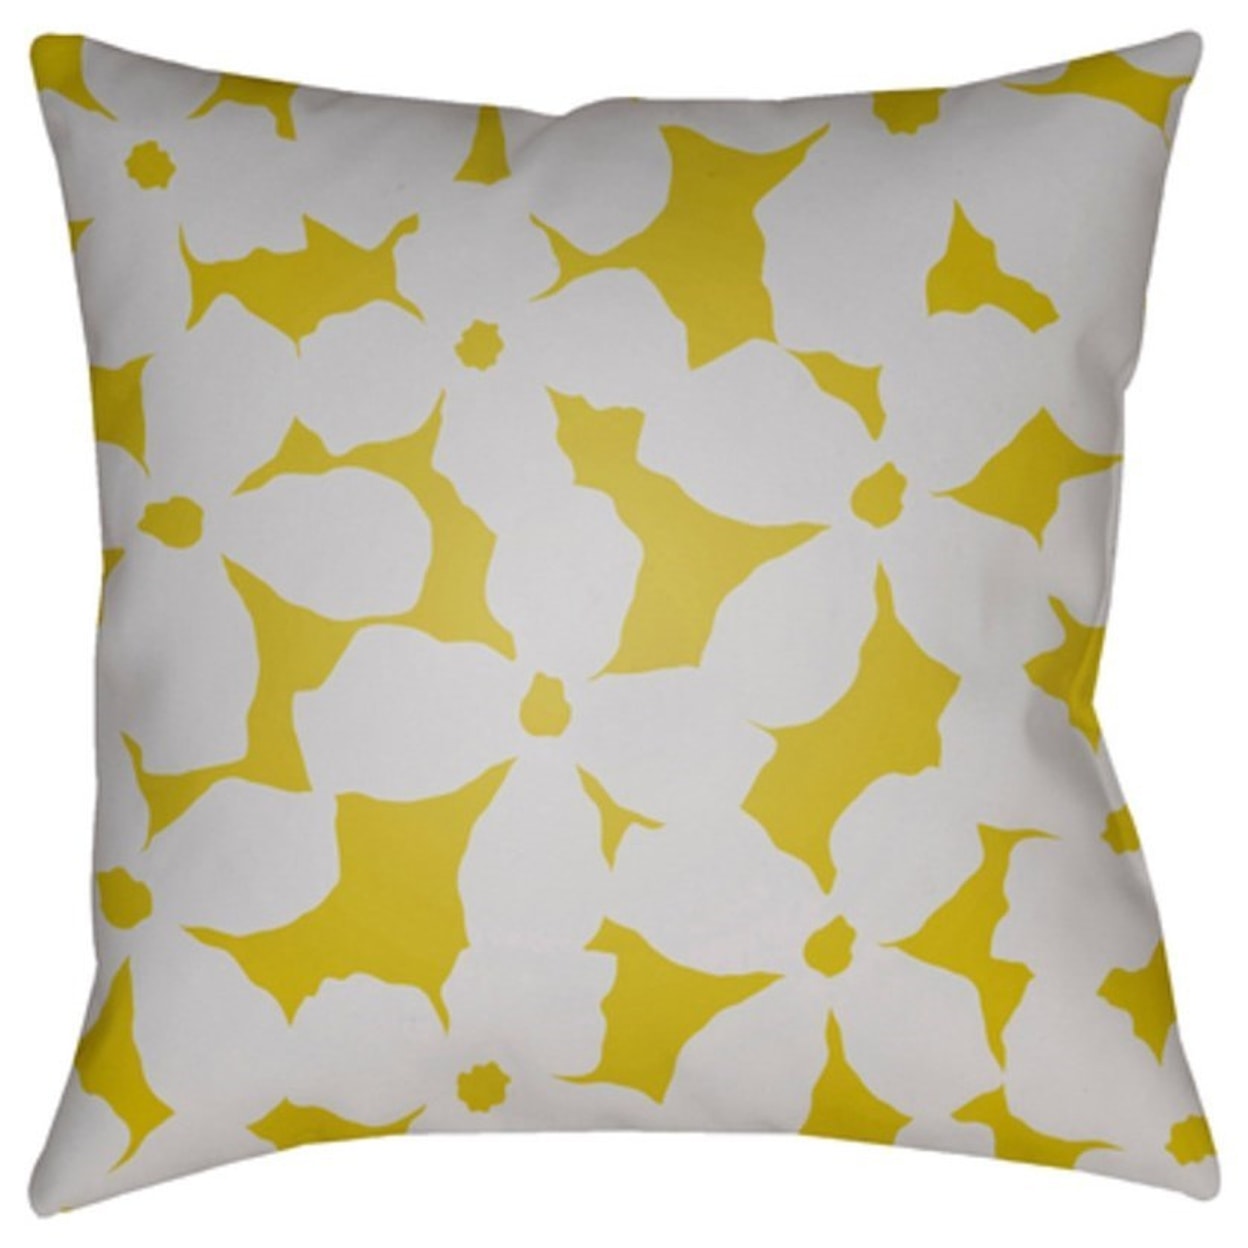 Surya Moody Floral Pillow